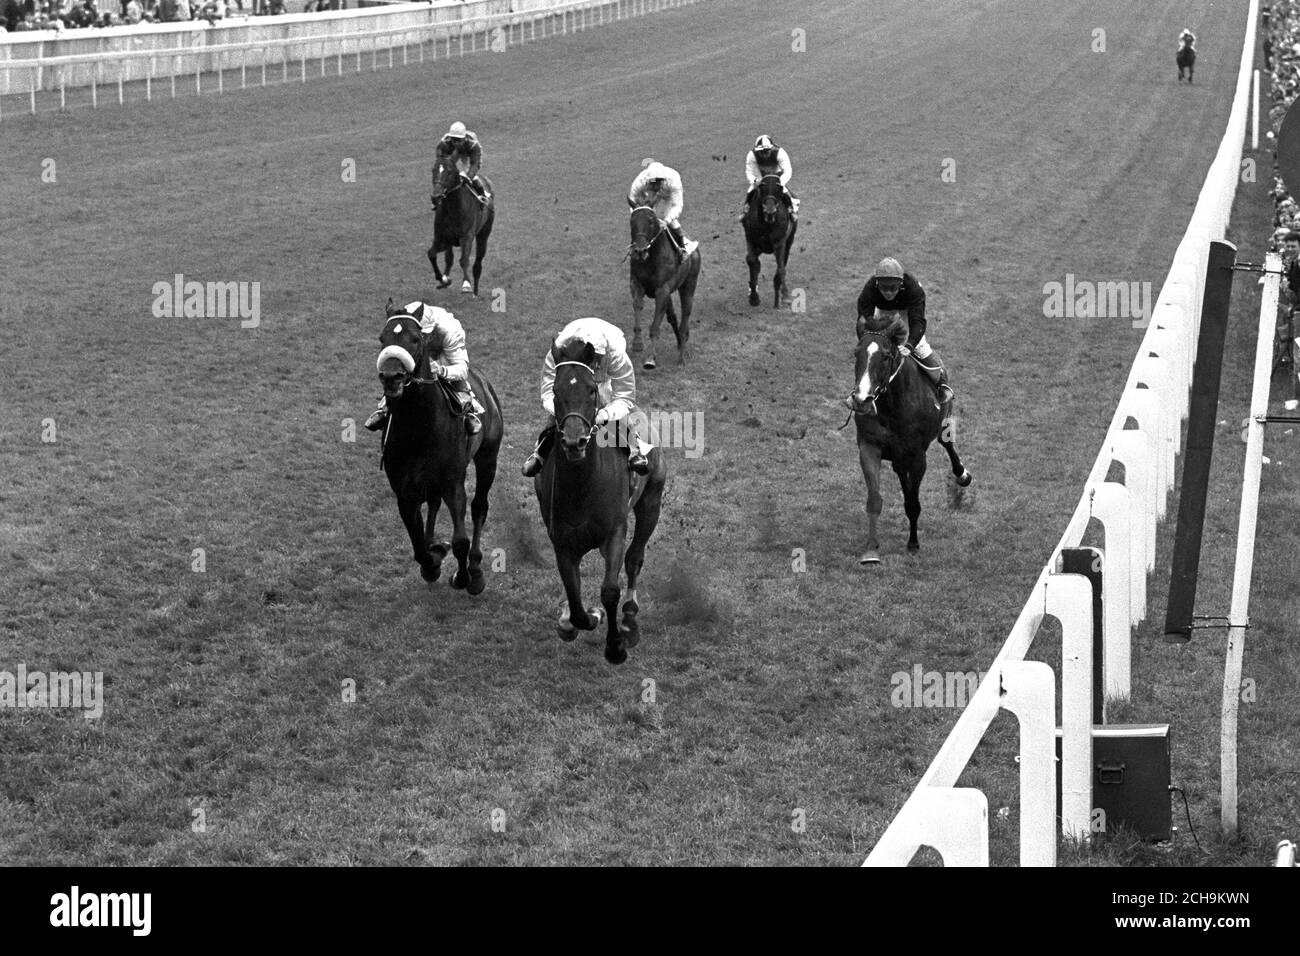 The Duke of Devonshire's Park Top (centre), ridden by Lester Piggott, winning the Coronation Cup at Epsom today, from AJ Struthers' Mount Athos (left), with R Hutchinson up. Finishing third is HJ Joel's Connaught (right), ridden by Sandy Barclay. Stock Photo